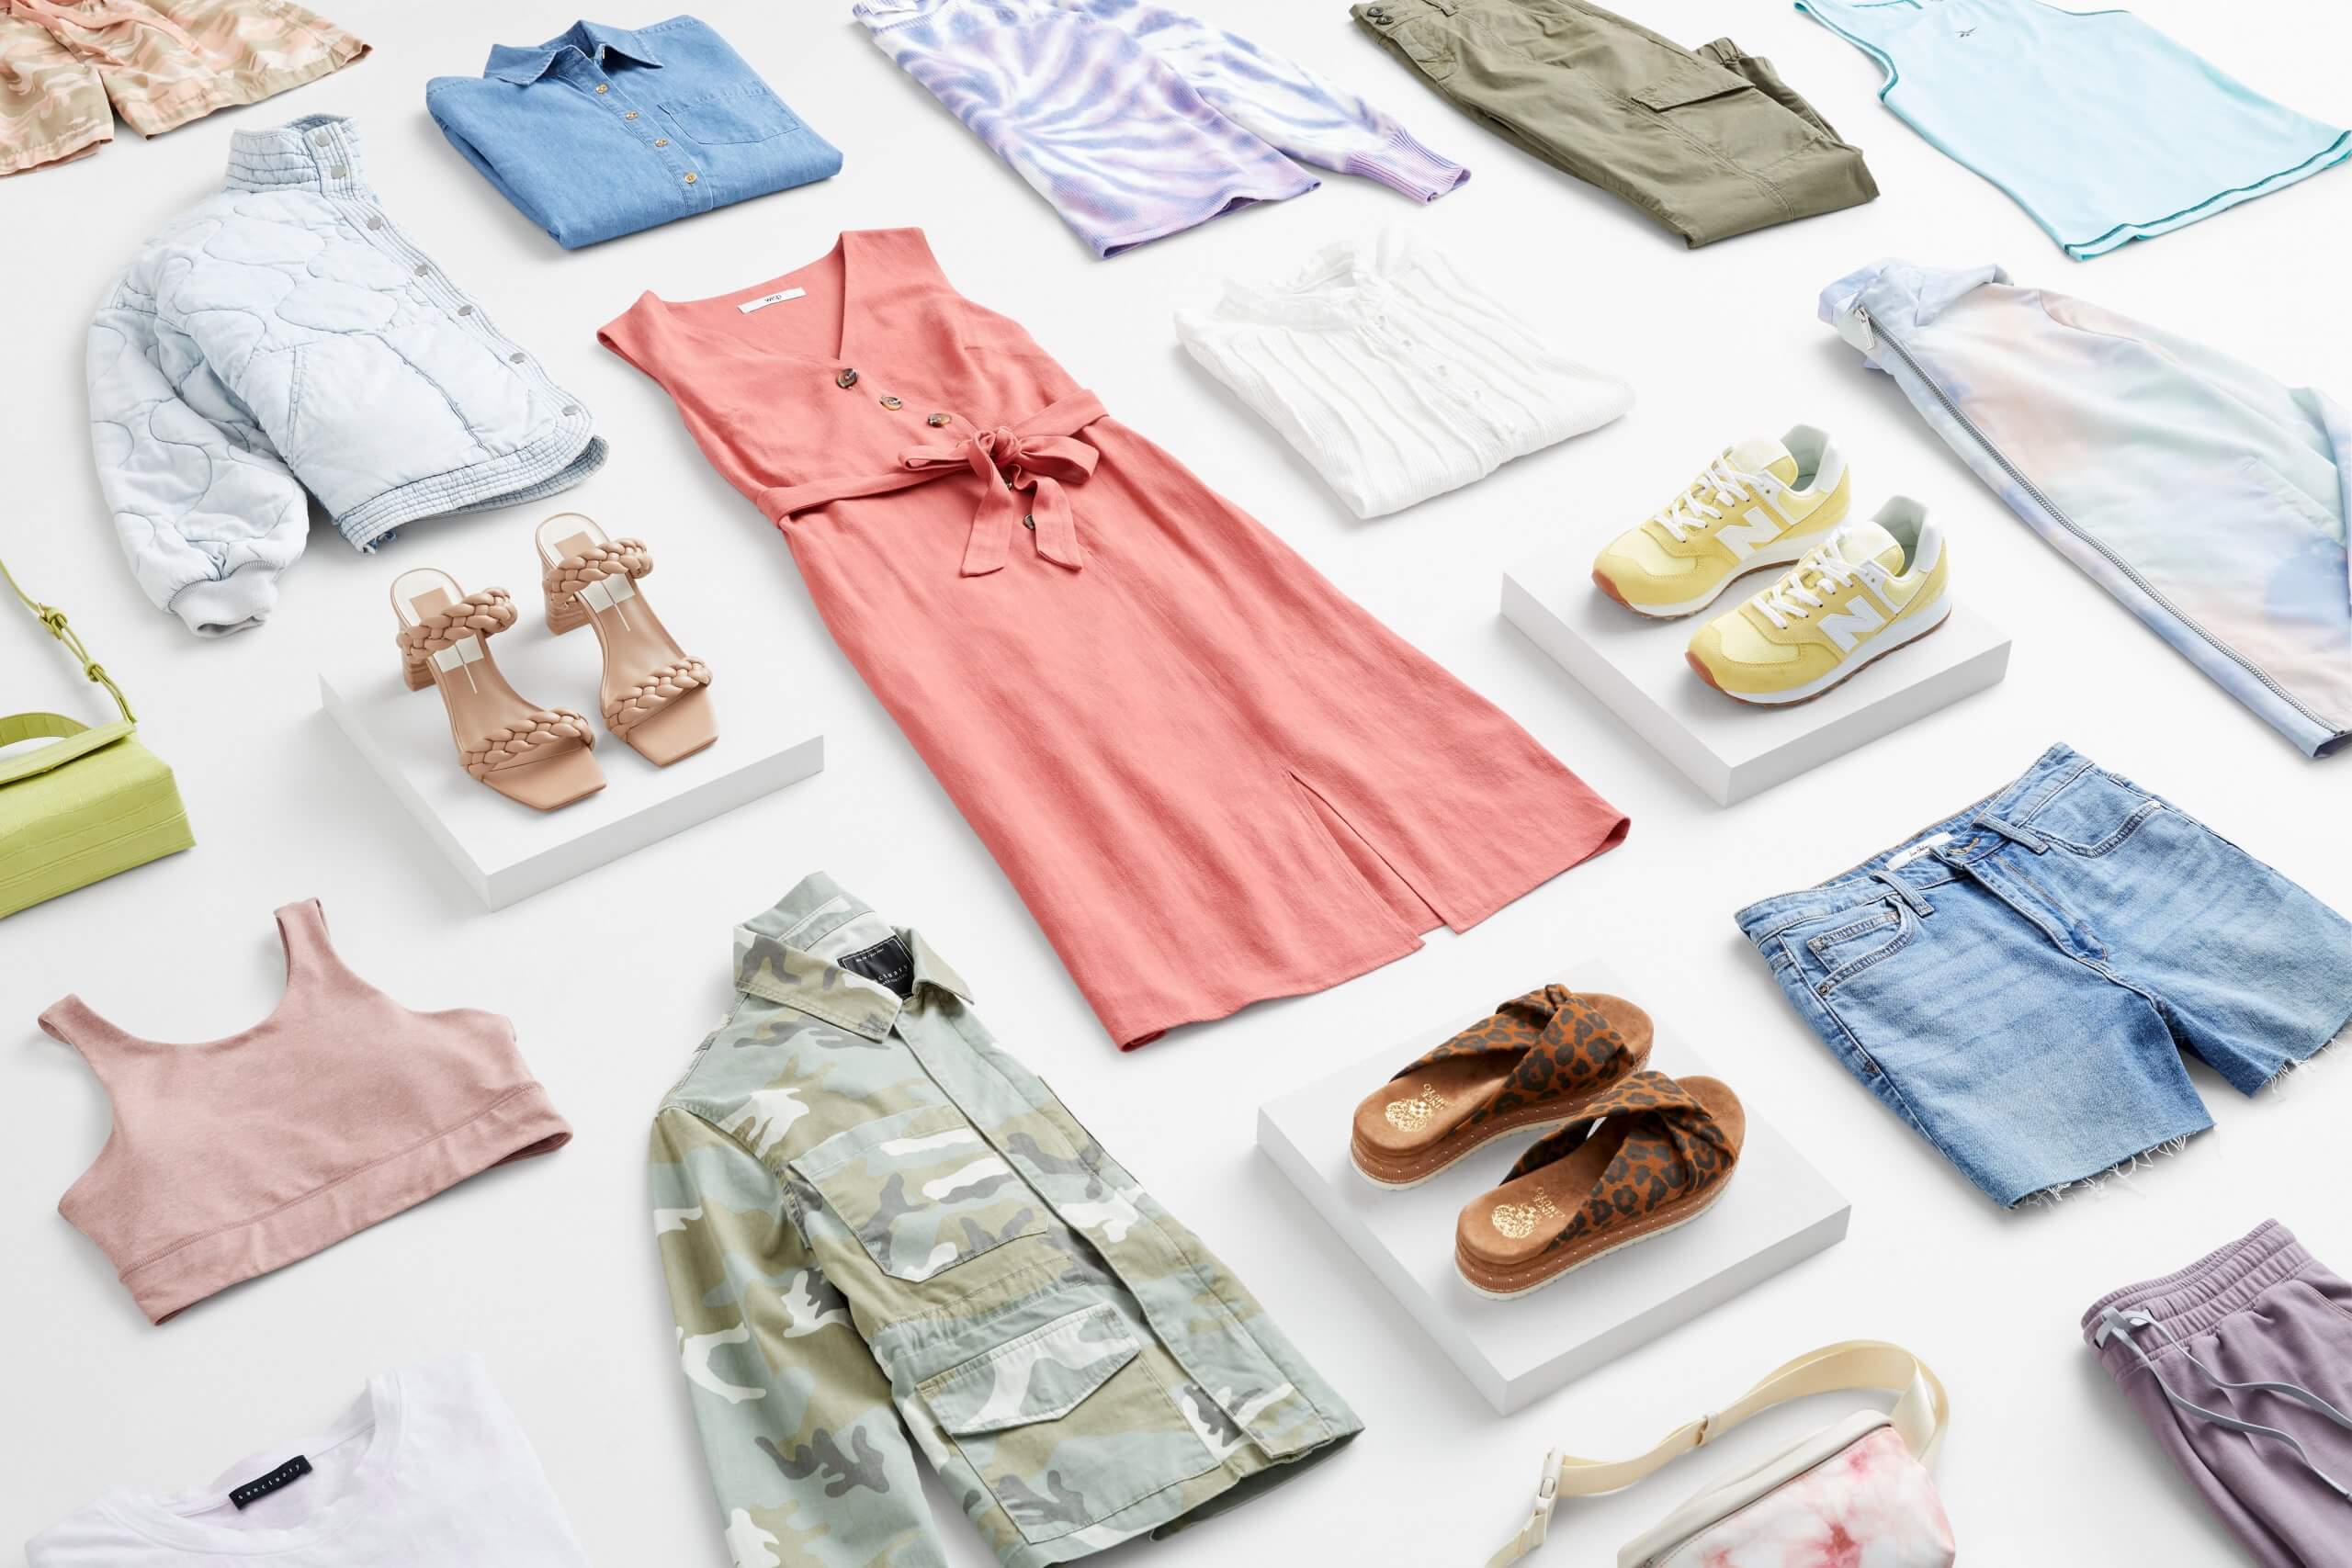 Stitch Fix women’s sustainable styles lay down featuring loungewear, sundresses, jackets and shoes.